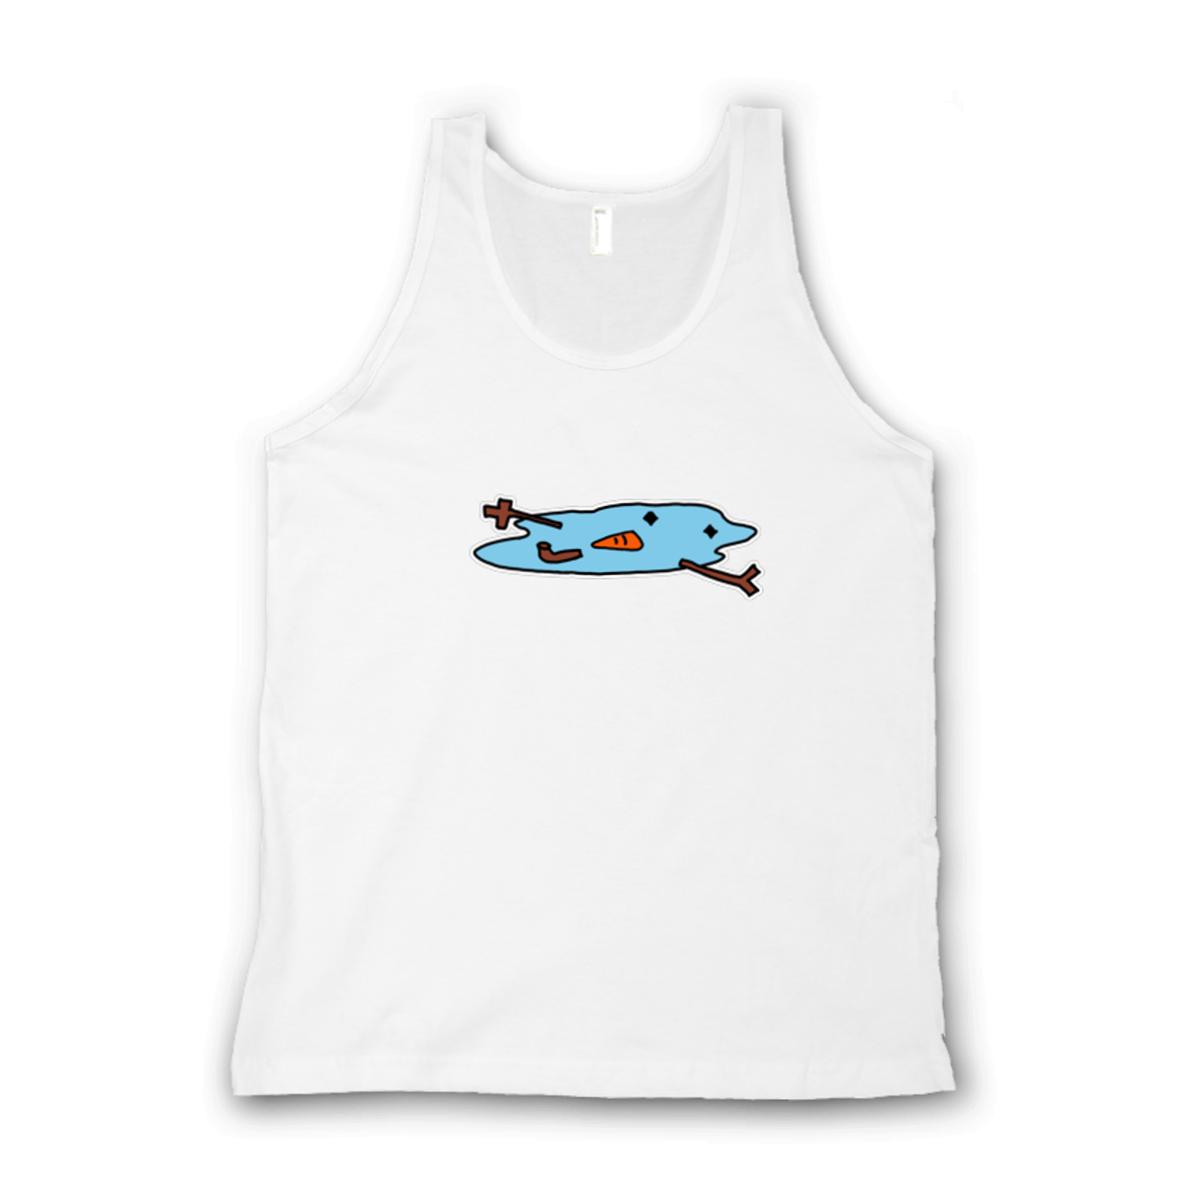 Snowman Puddle Unisex Tank Top Small white